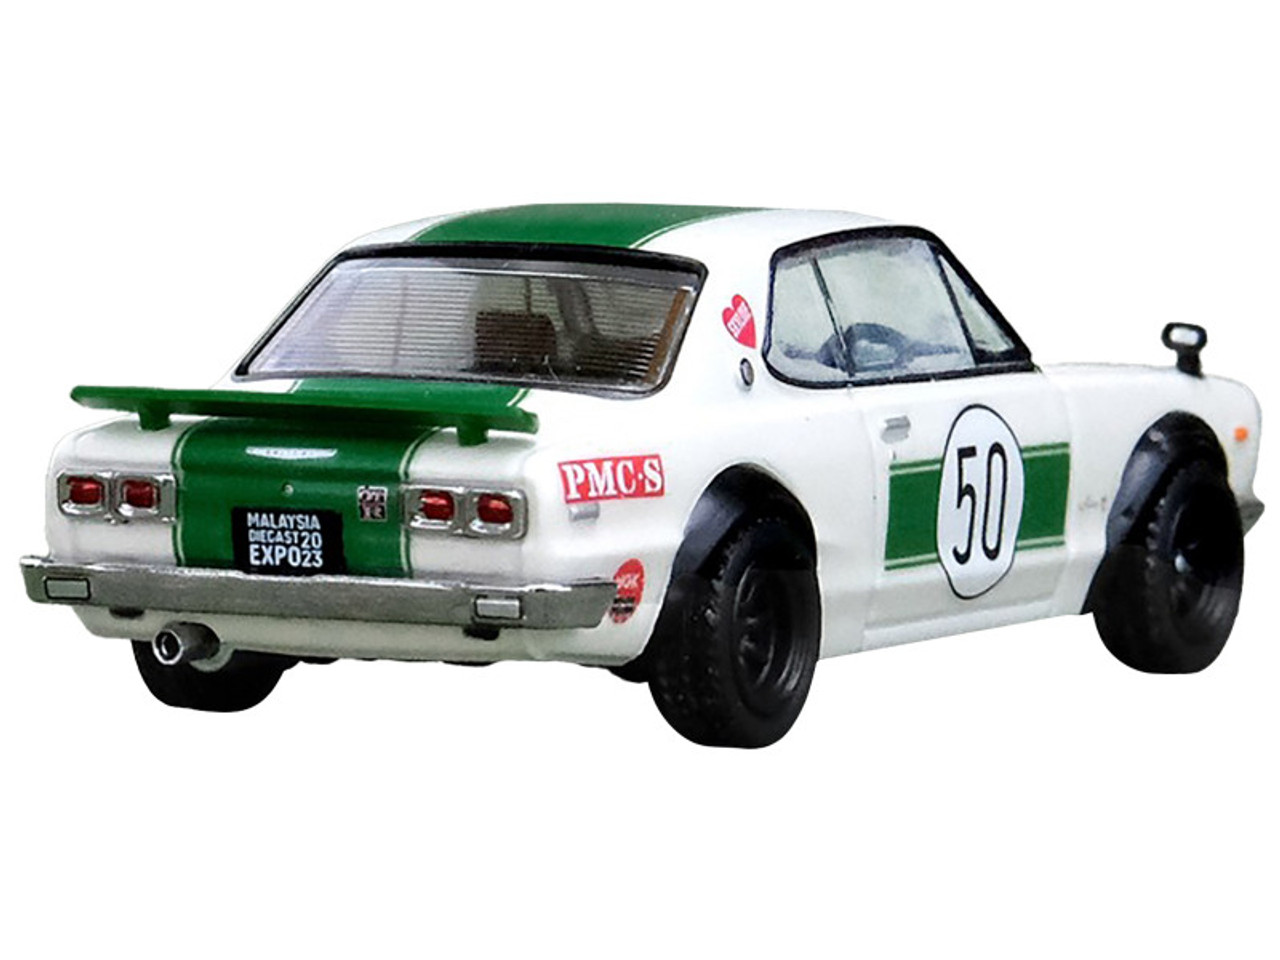 Nissan Skyline 2000 GT-R (KPGC10) #50 RHD (Right Hand Drive) White with Green Stripes "Malaysia Diecast Expo Event Edition" (2023) 1/64 Diecast Model Car by Inno Models